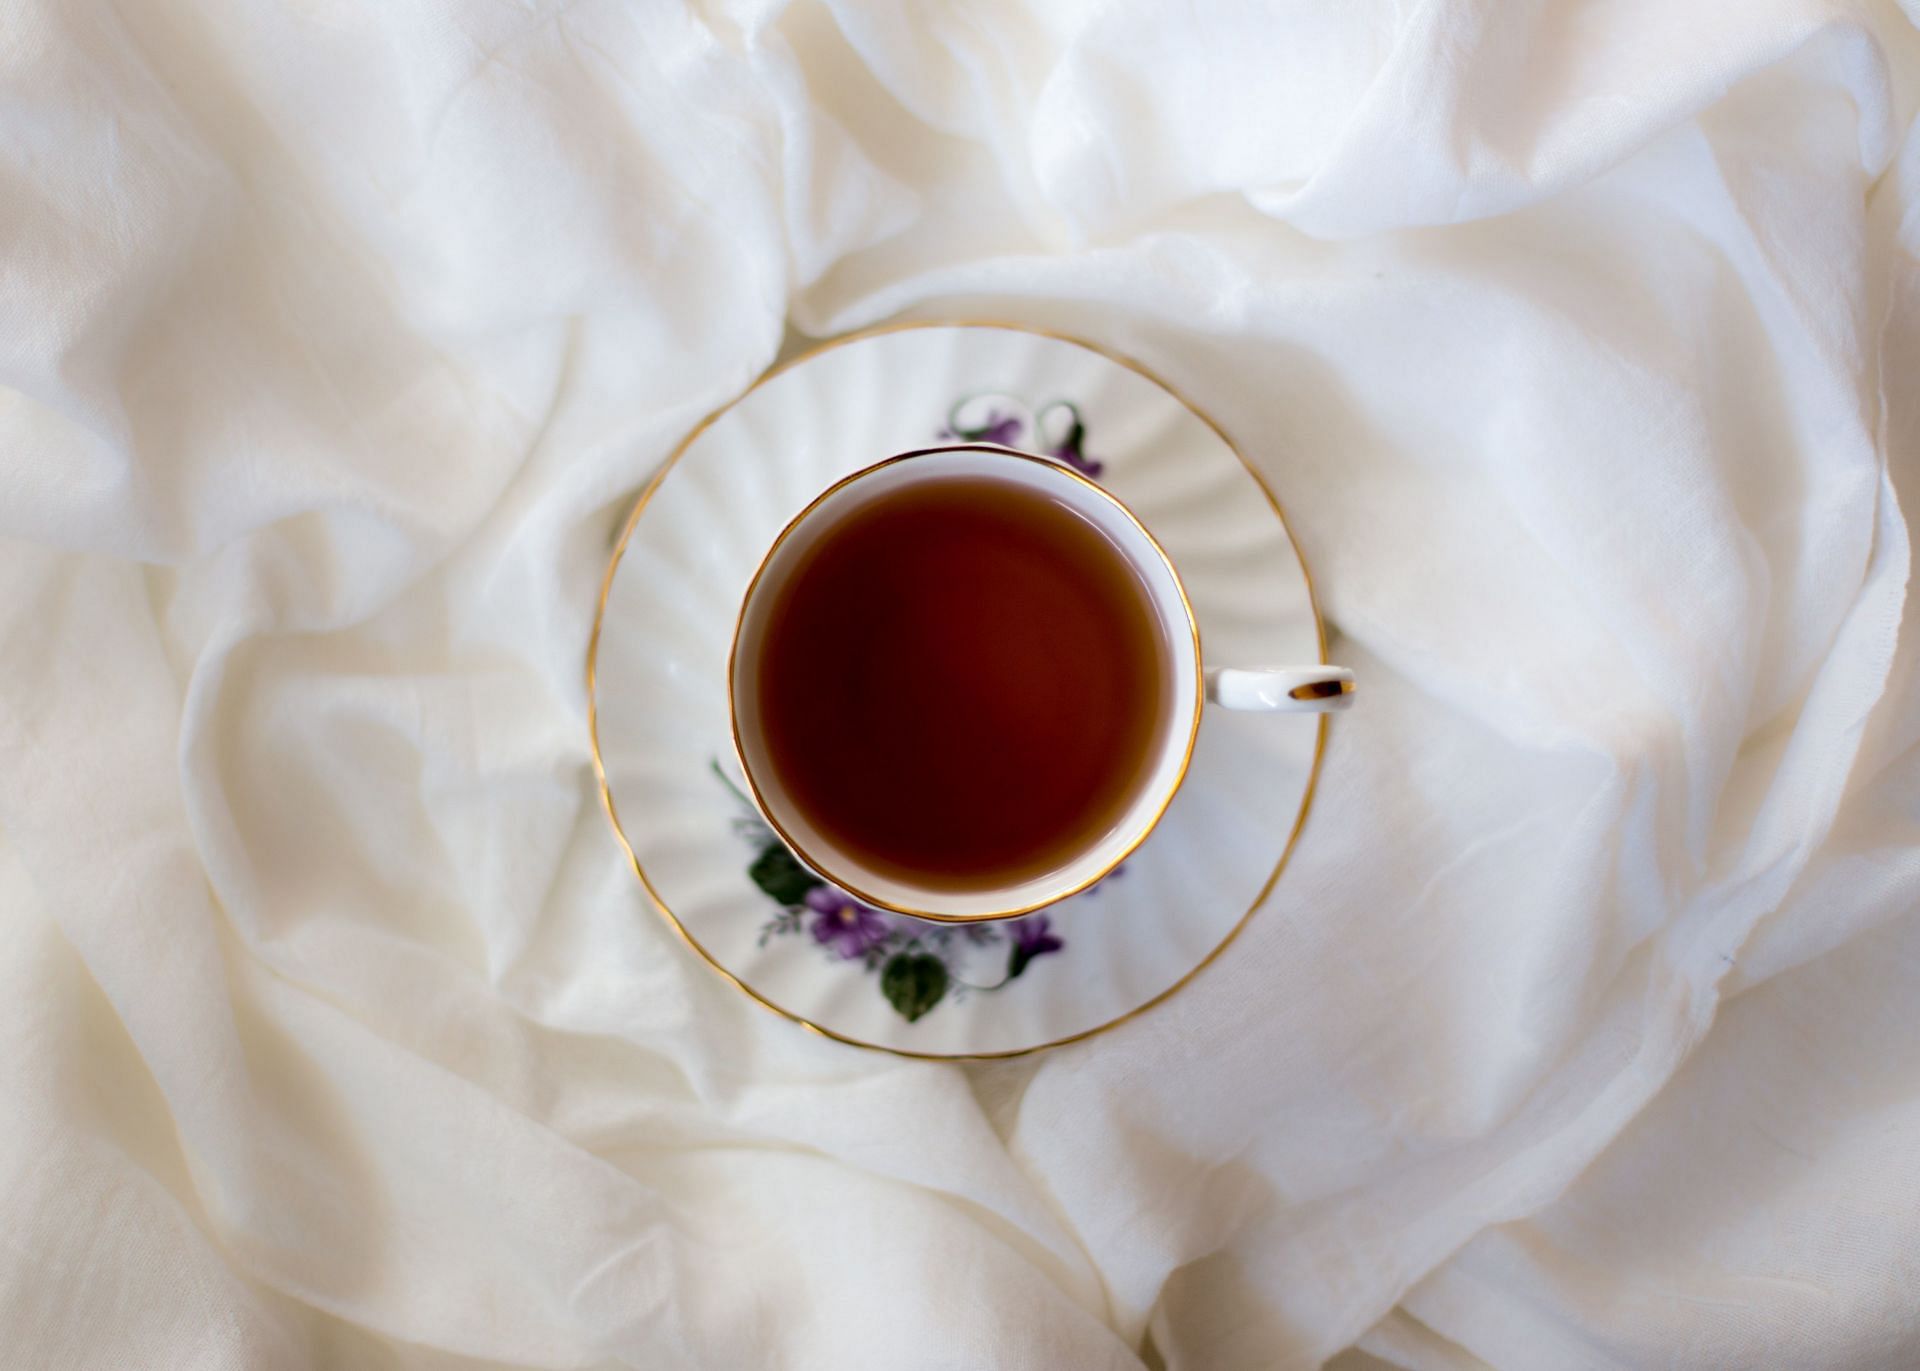 There are many benefits of black tea, including its high antioxidant content. (Image via Unsplash / Sixteen Miles out)